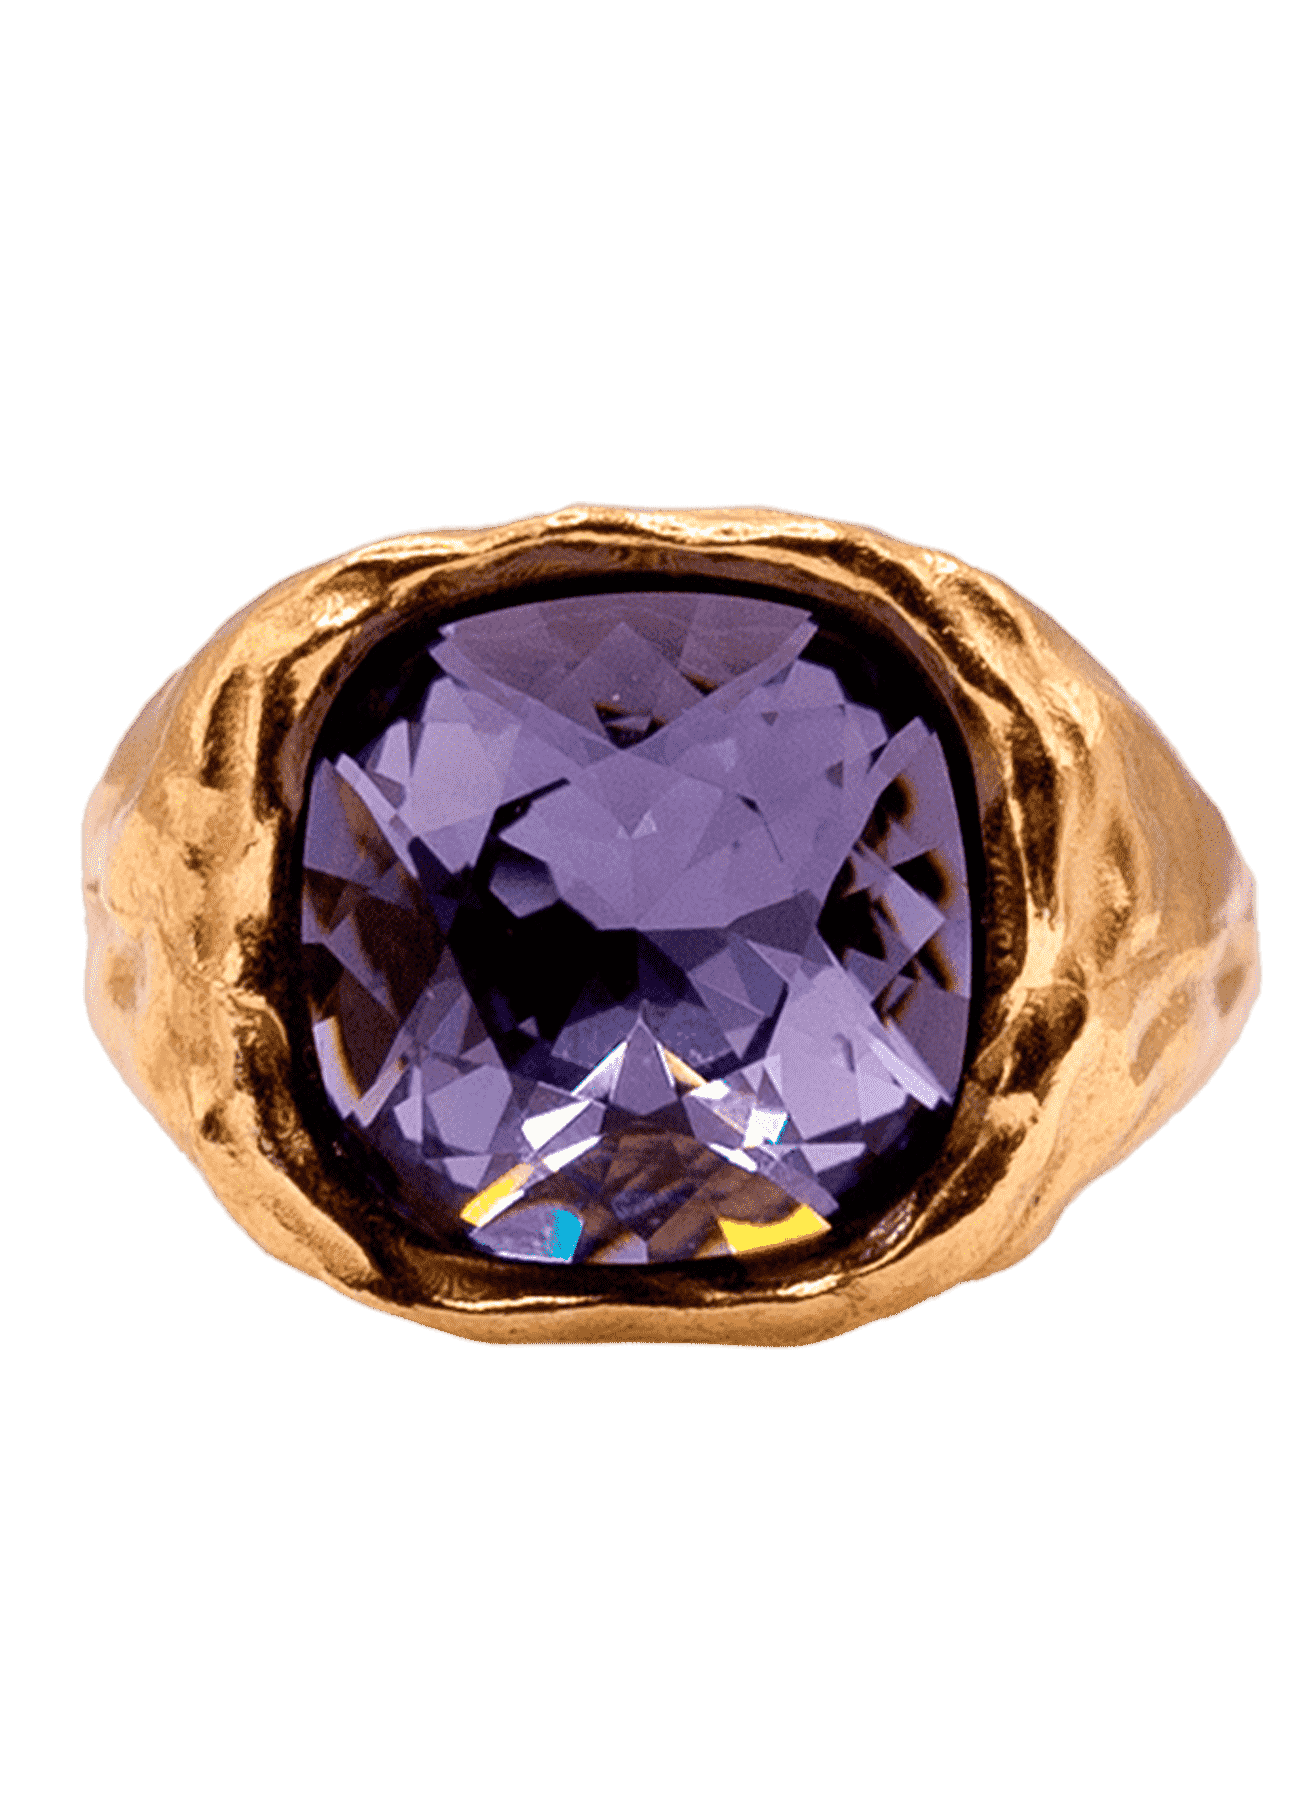 Amalfi Lilac Solid Gold Ring